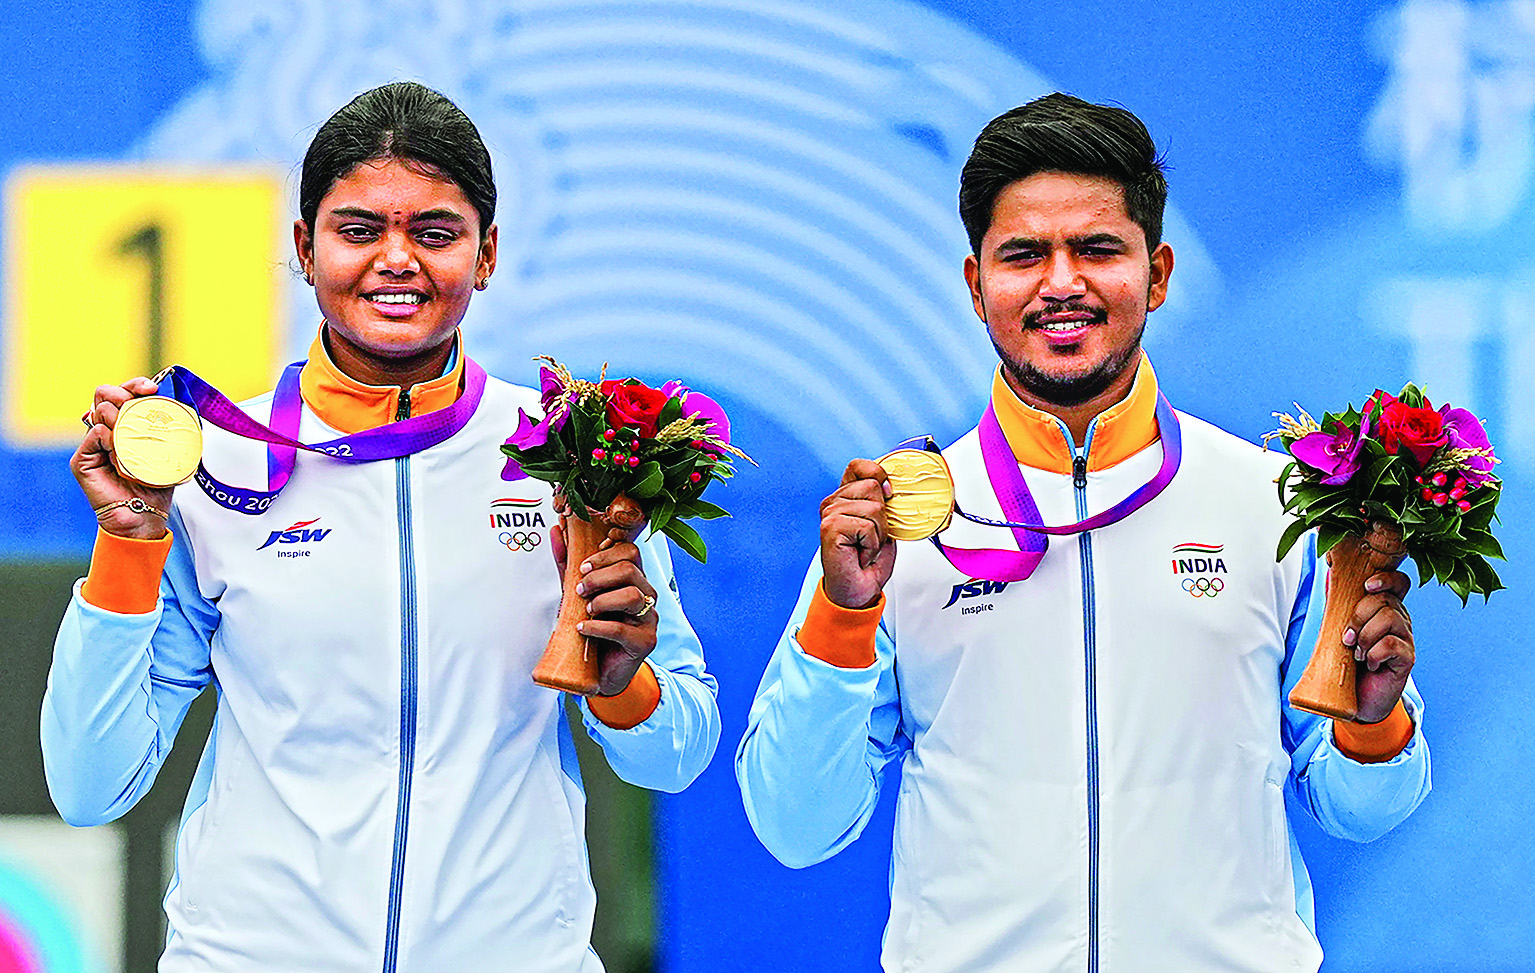 Jyothi-Ojas pair wins archery gold medal, a first for India